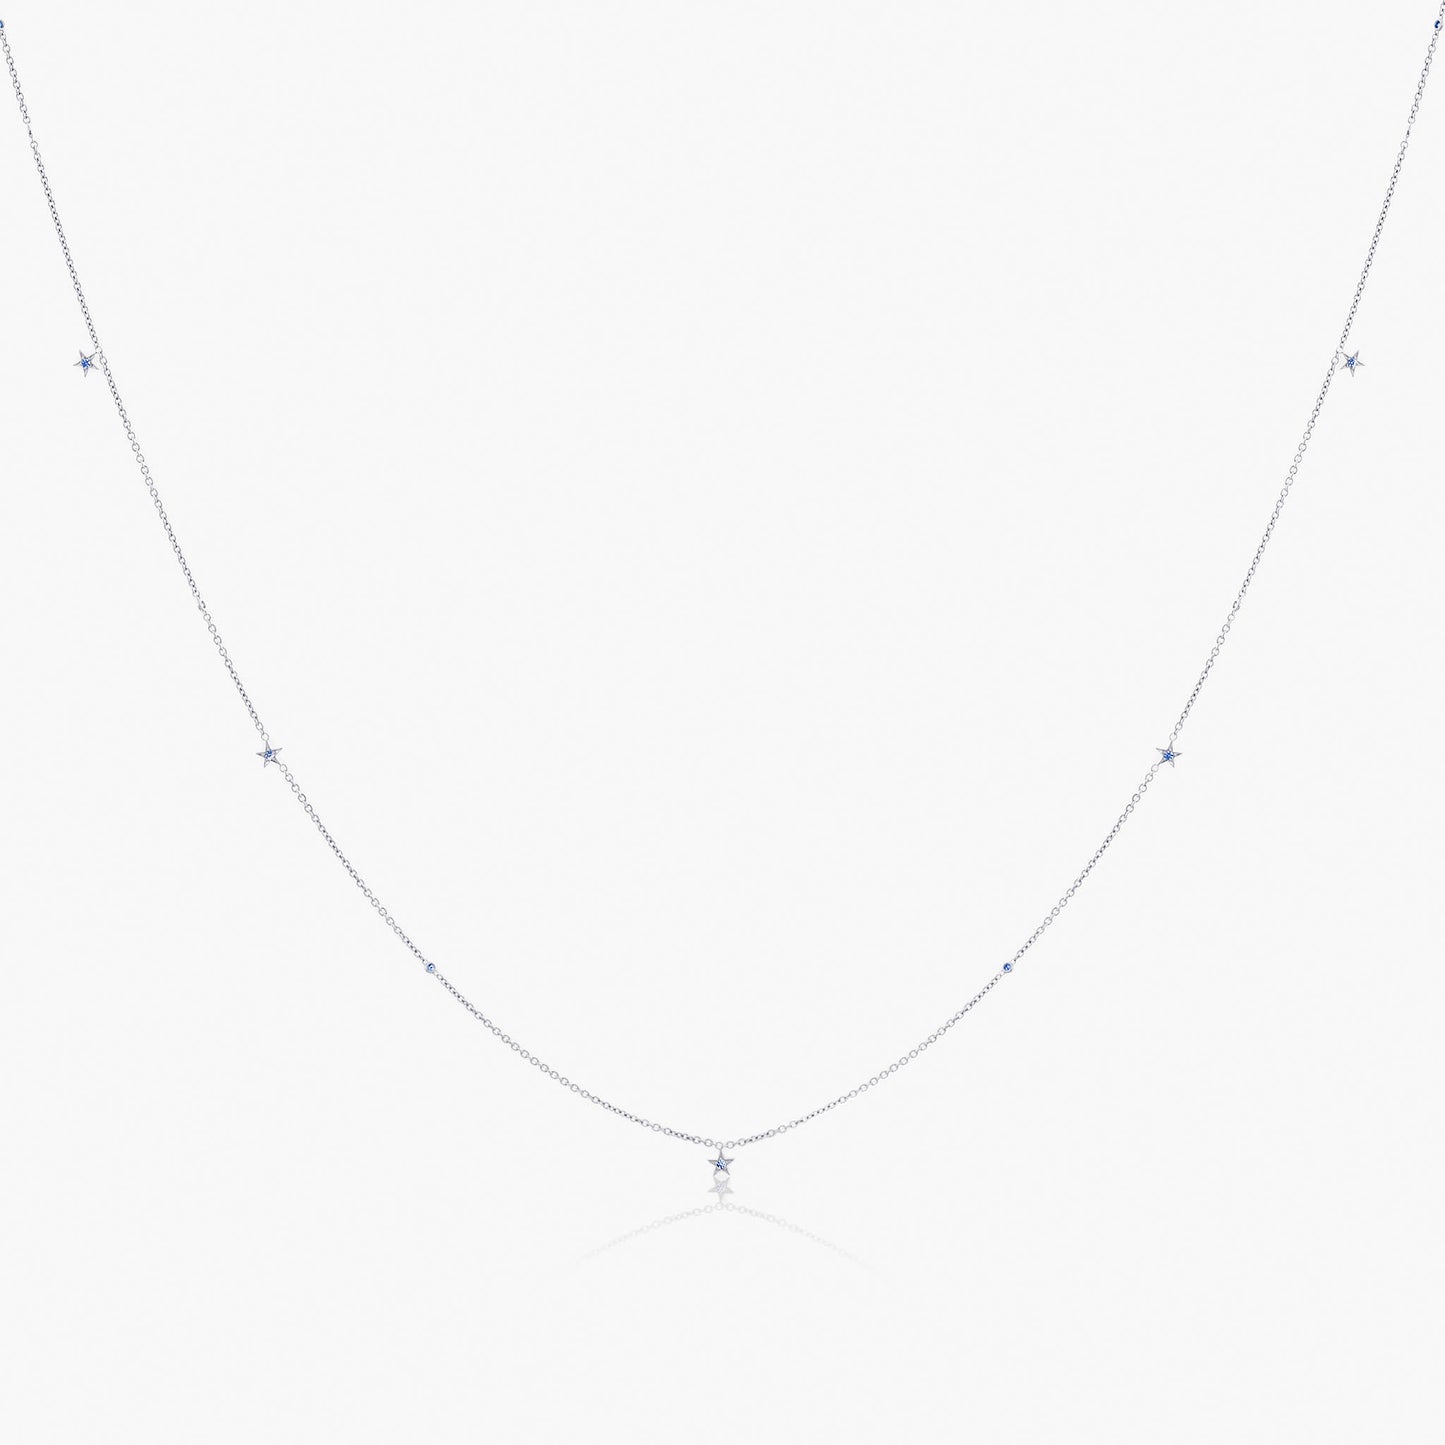 Guiding Star 18ct White Gold & Sapphire Necklace, 105cm